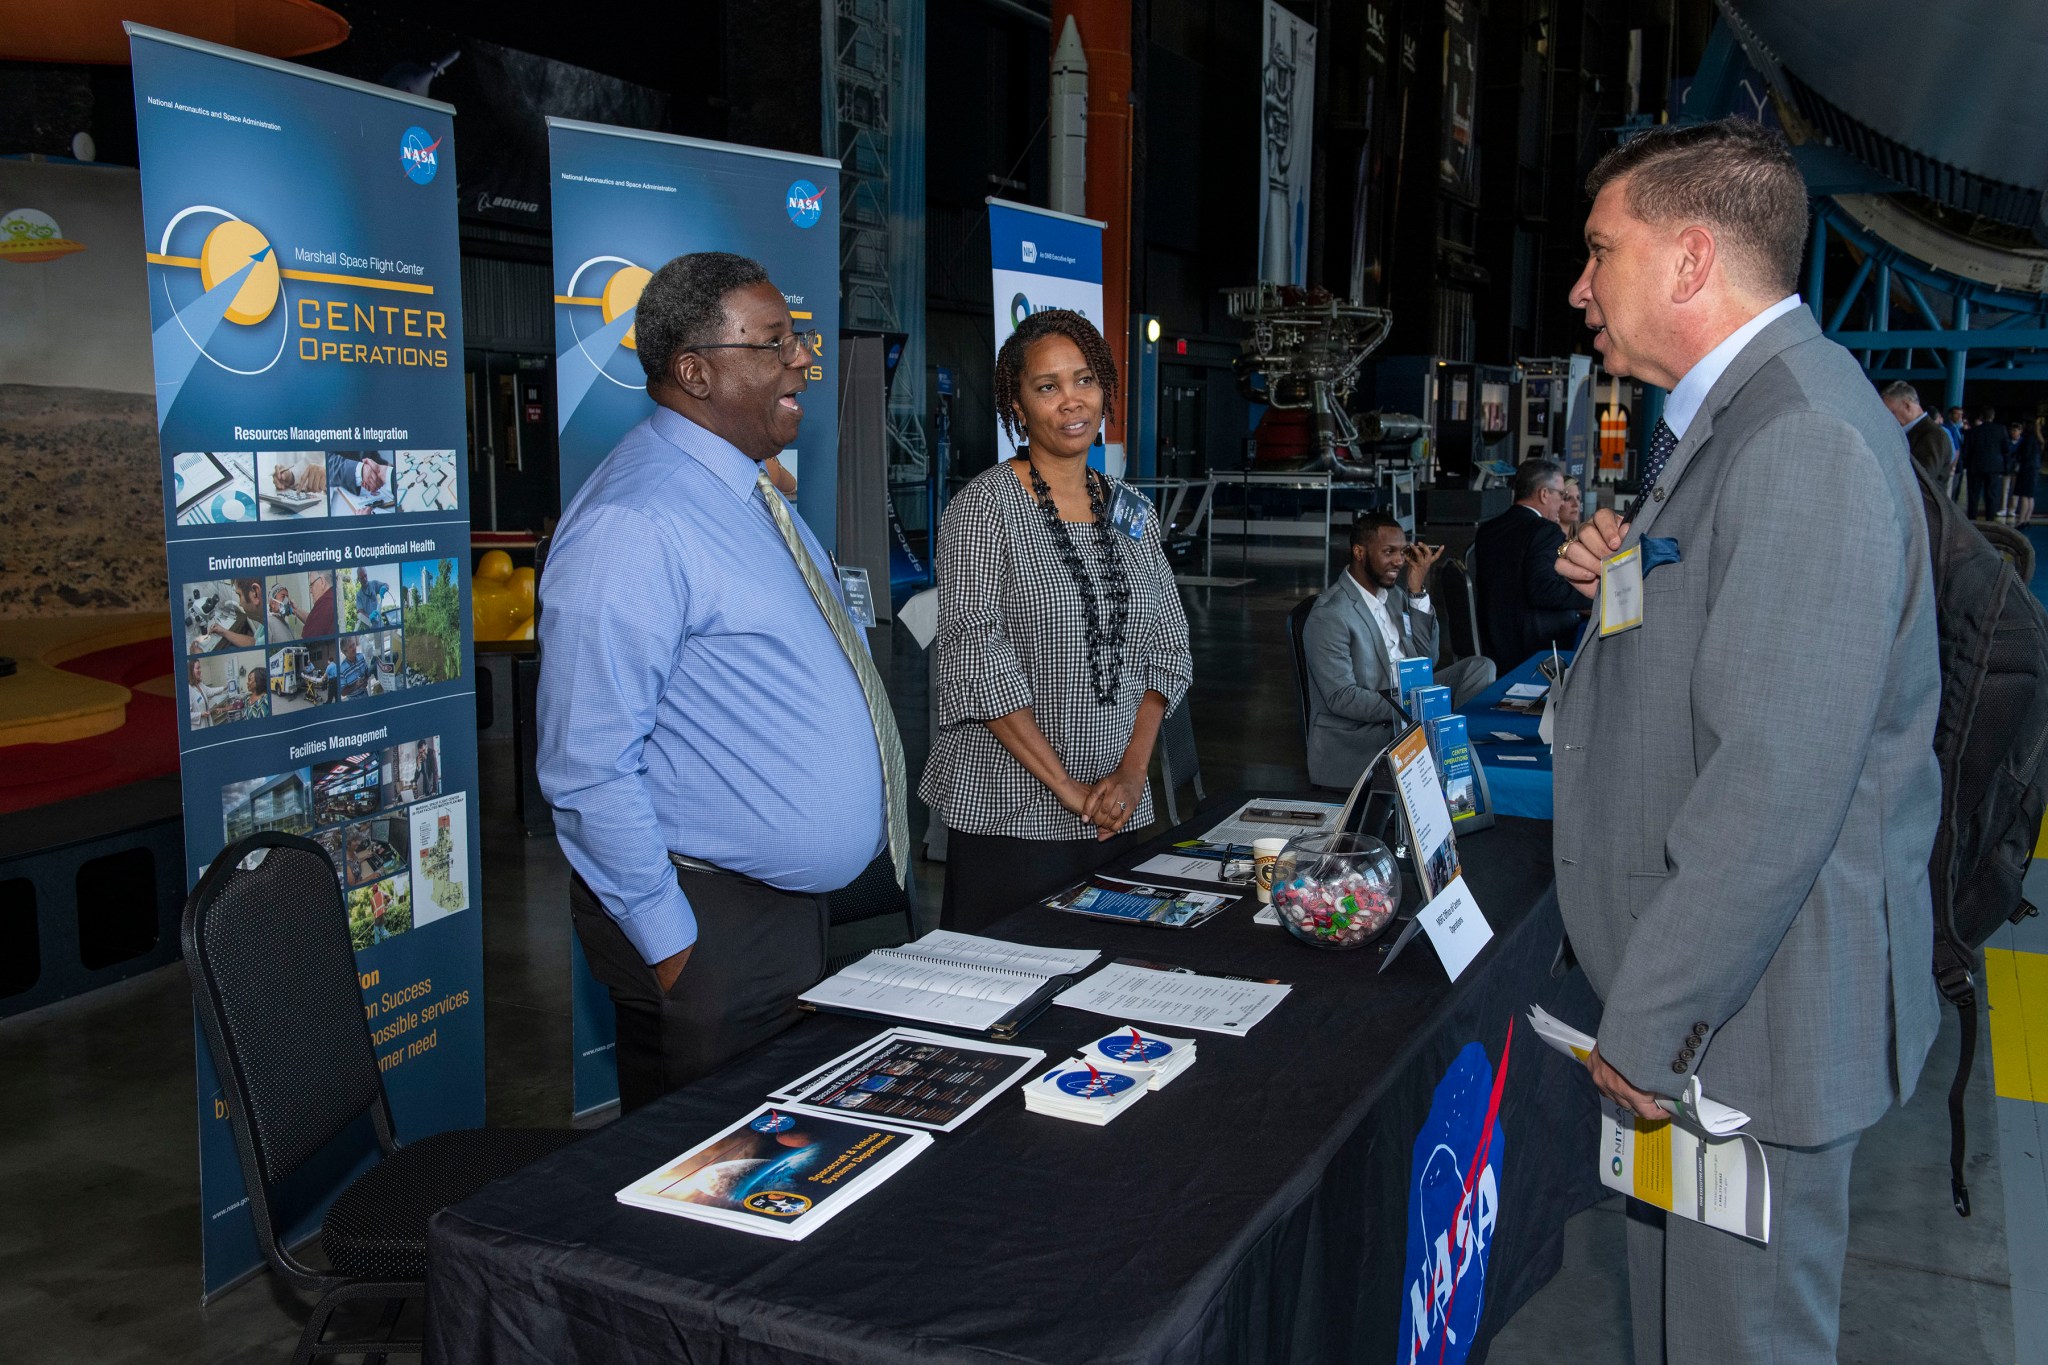 Melvin Scruggs, left, and Mary Poe speak with an attendee at the Small Business Alliance Meeting on Sept. 19.